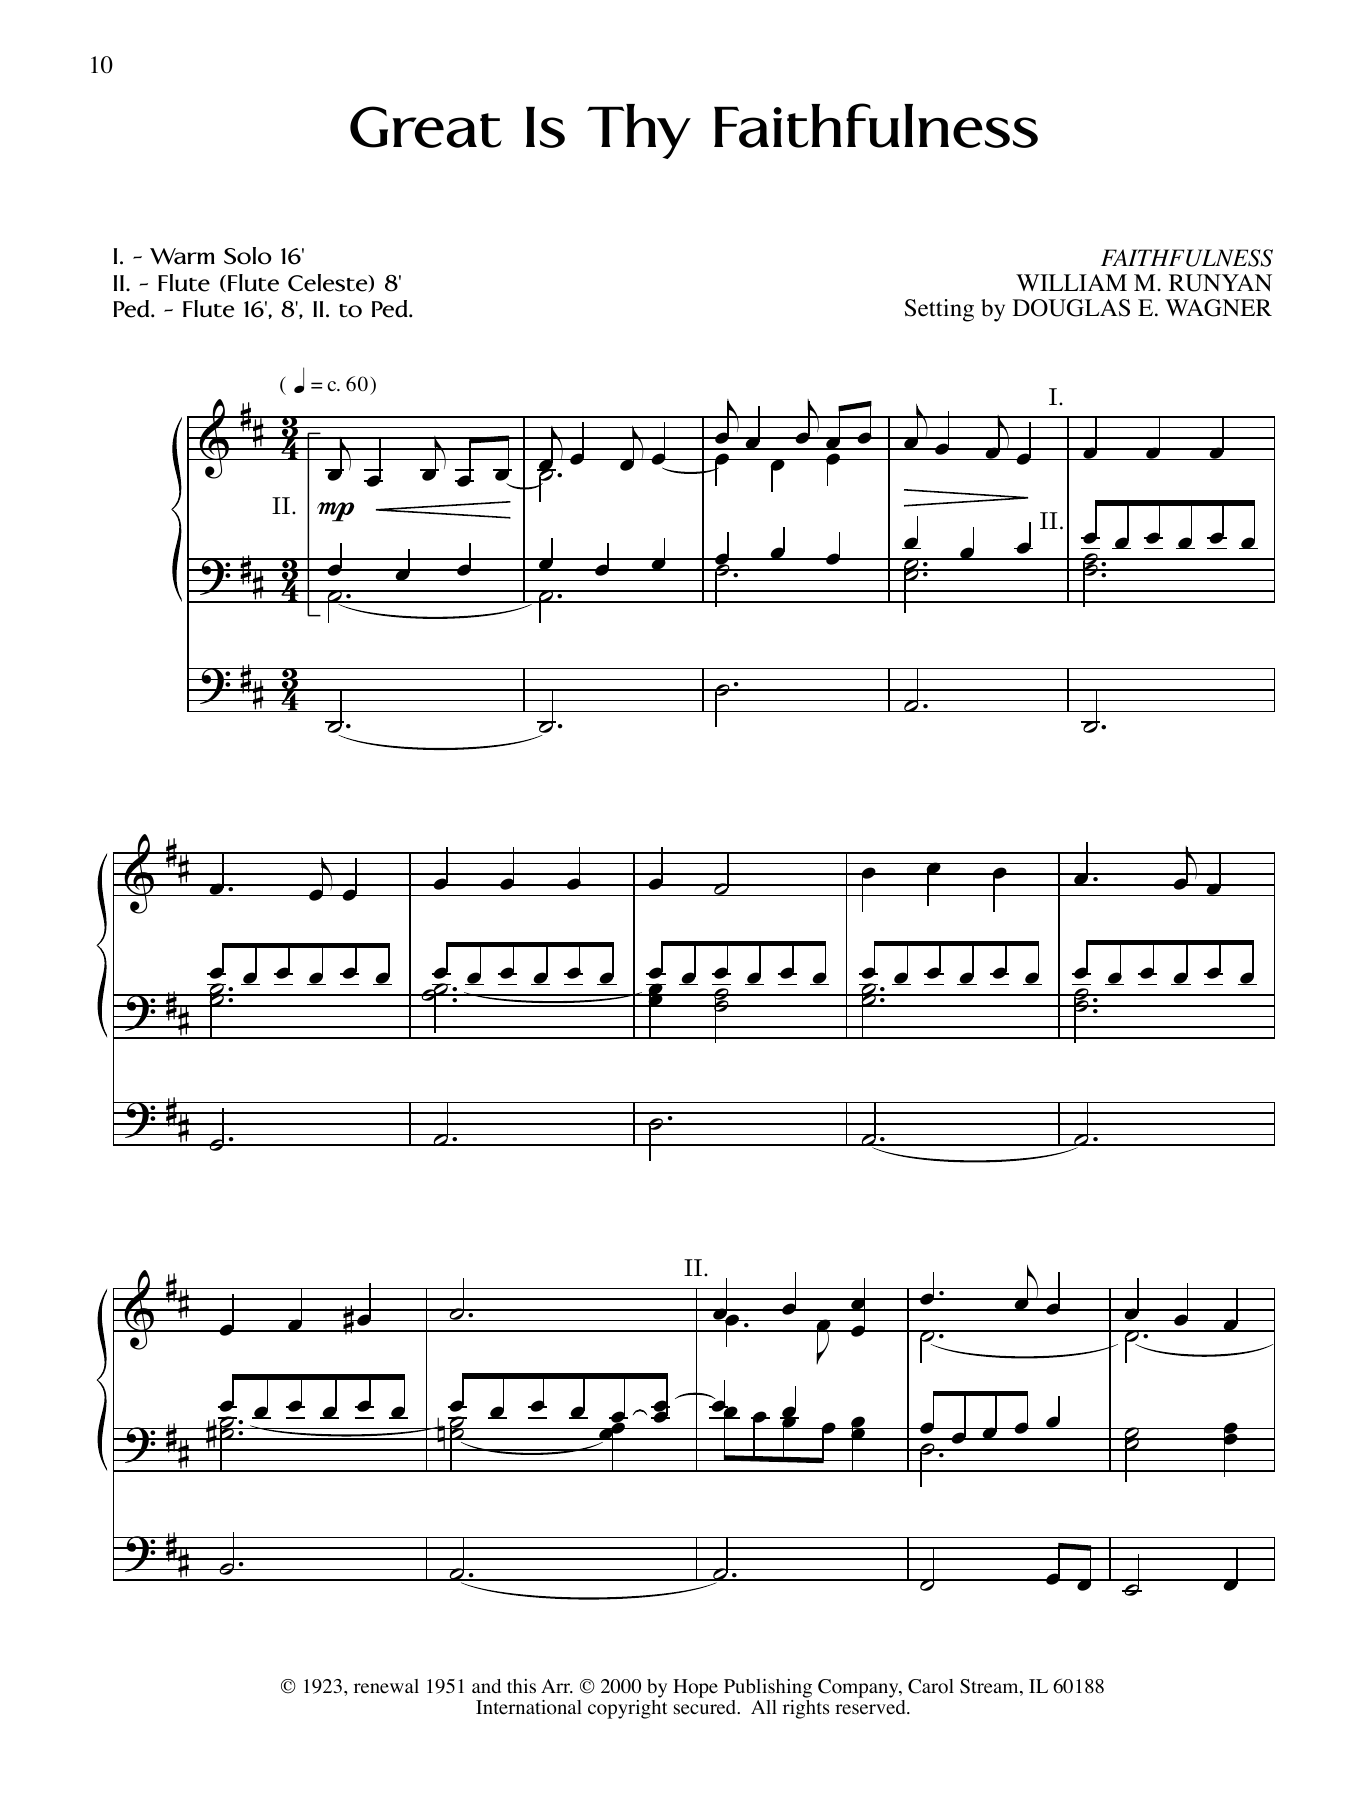 Download William M. Runyan Great is They Faithfulness Sheet Music